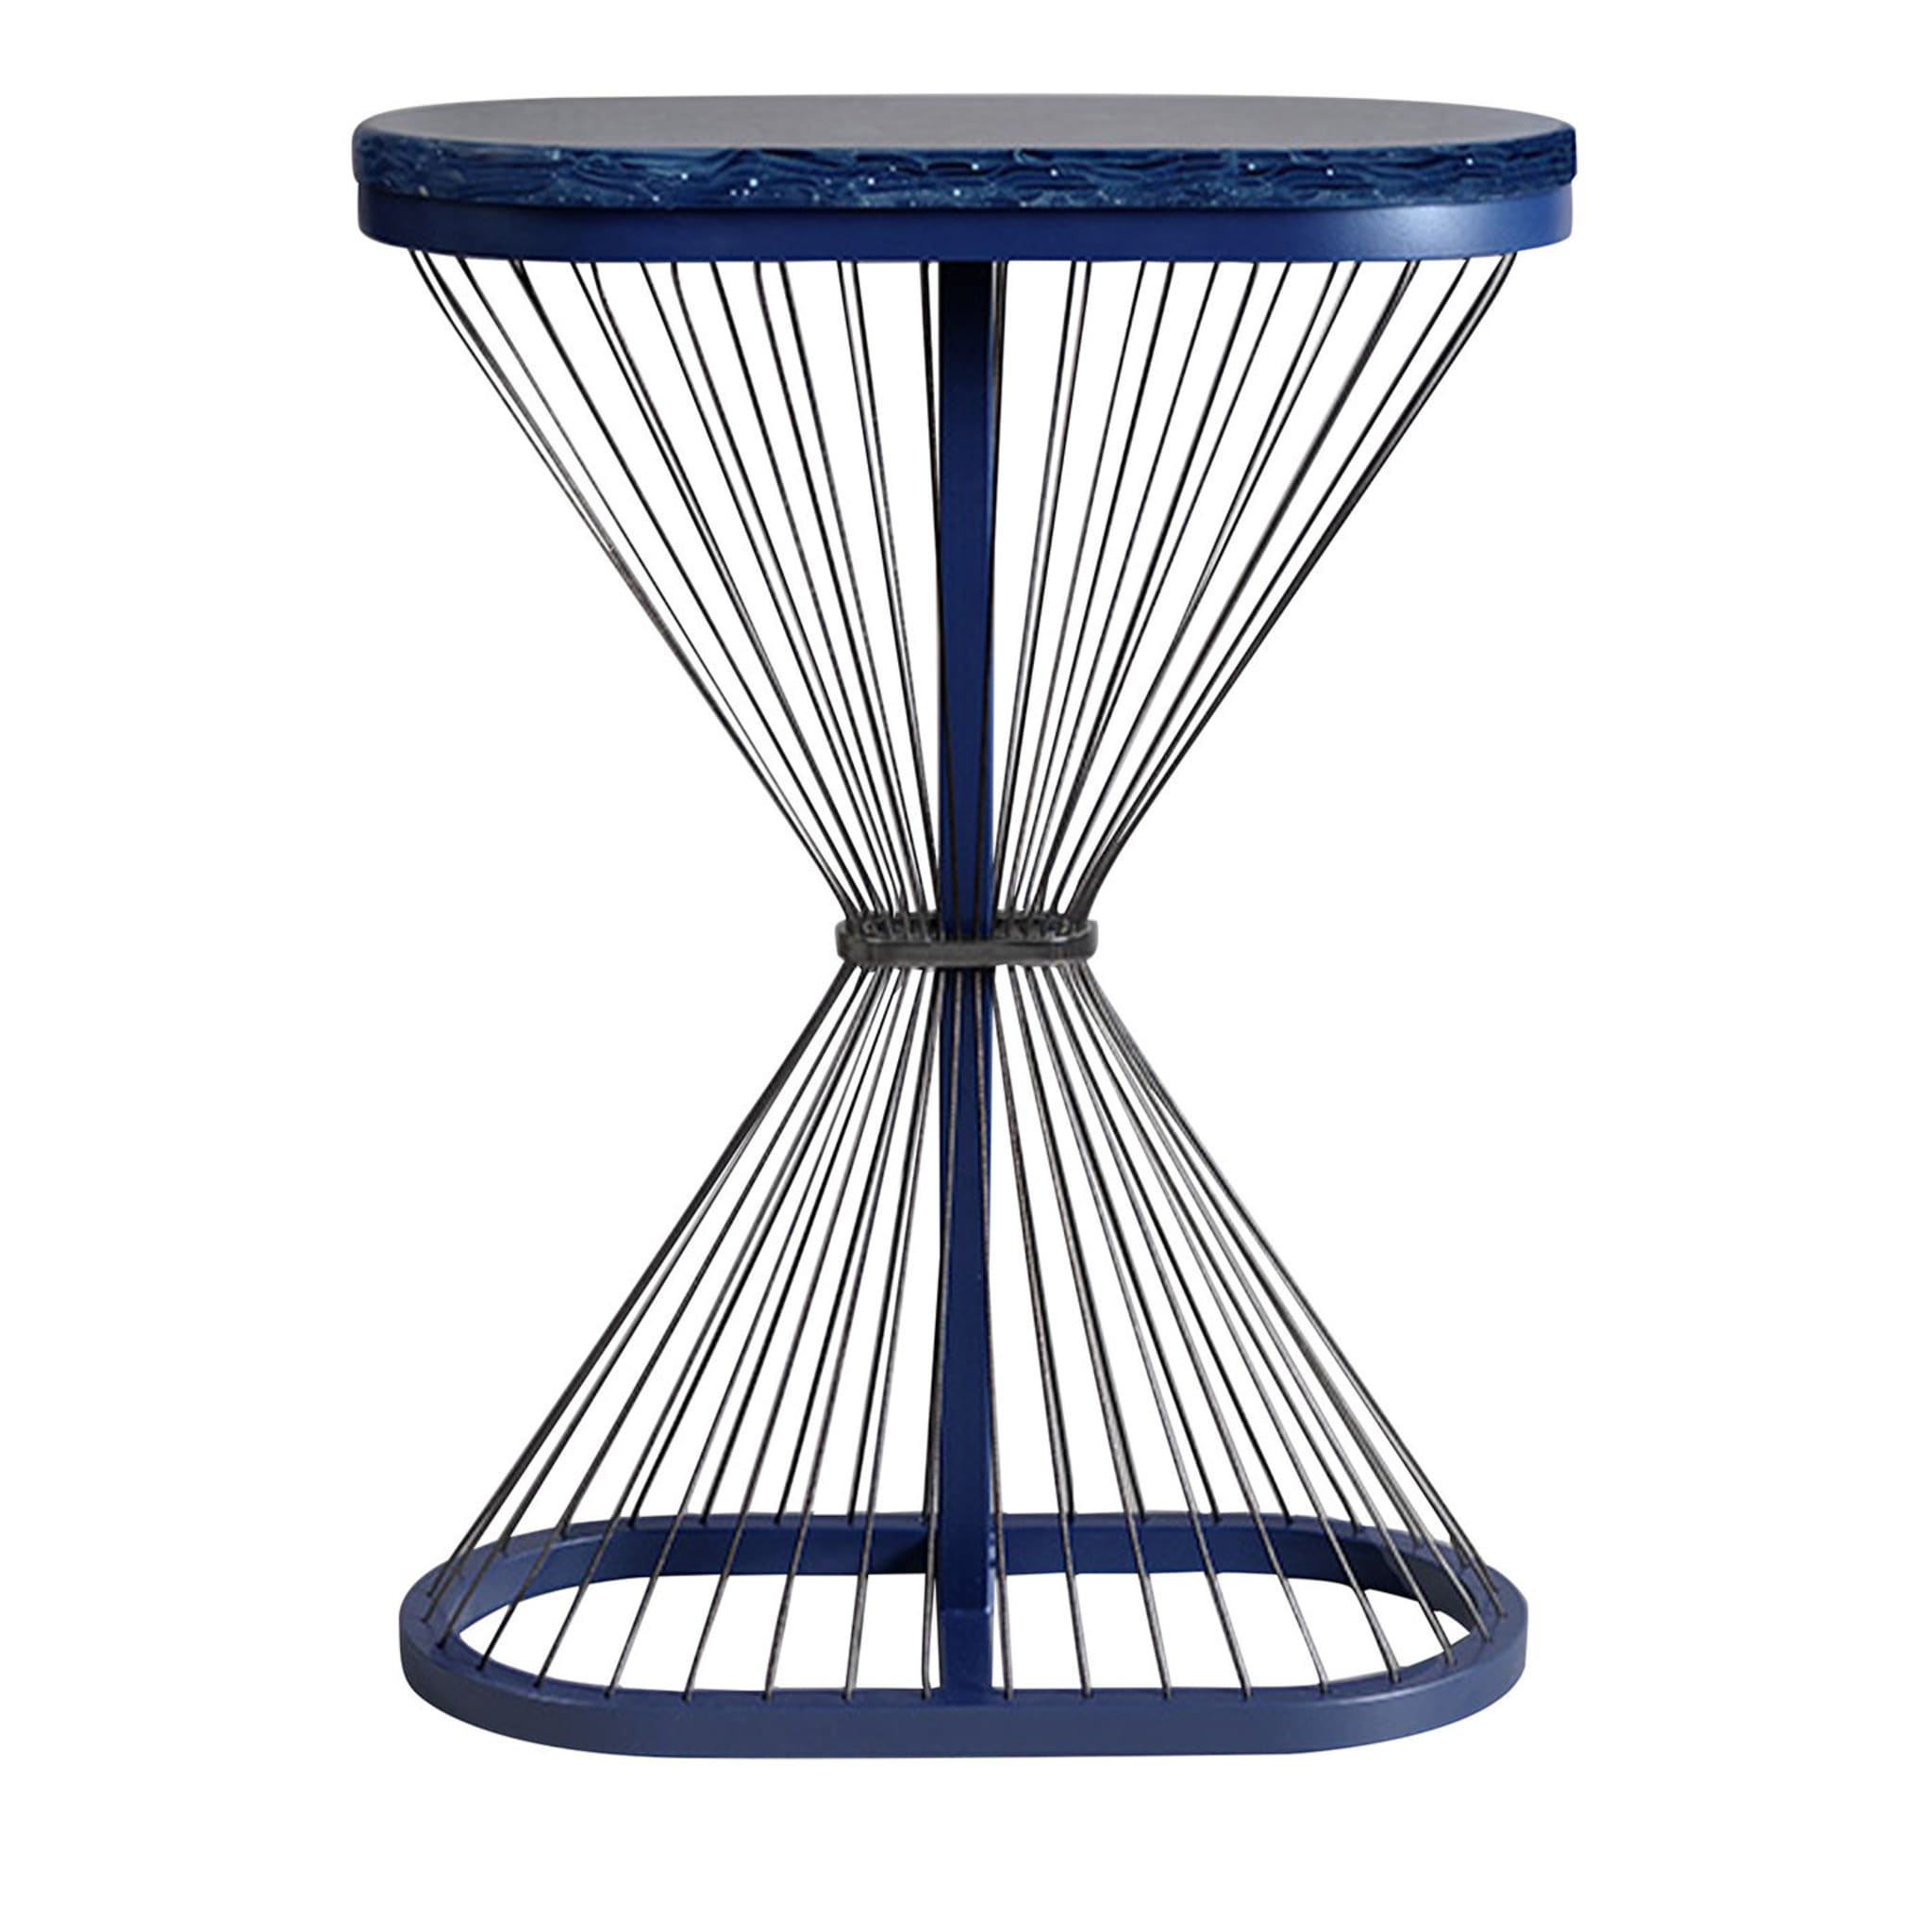 Aegis Small Oval Side Table by Ziad Alonaizy - Main view